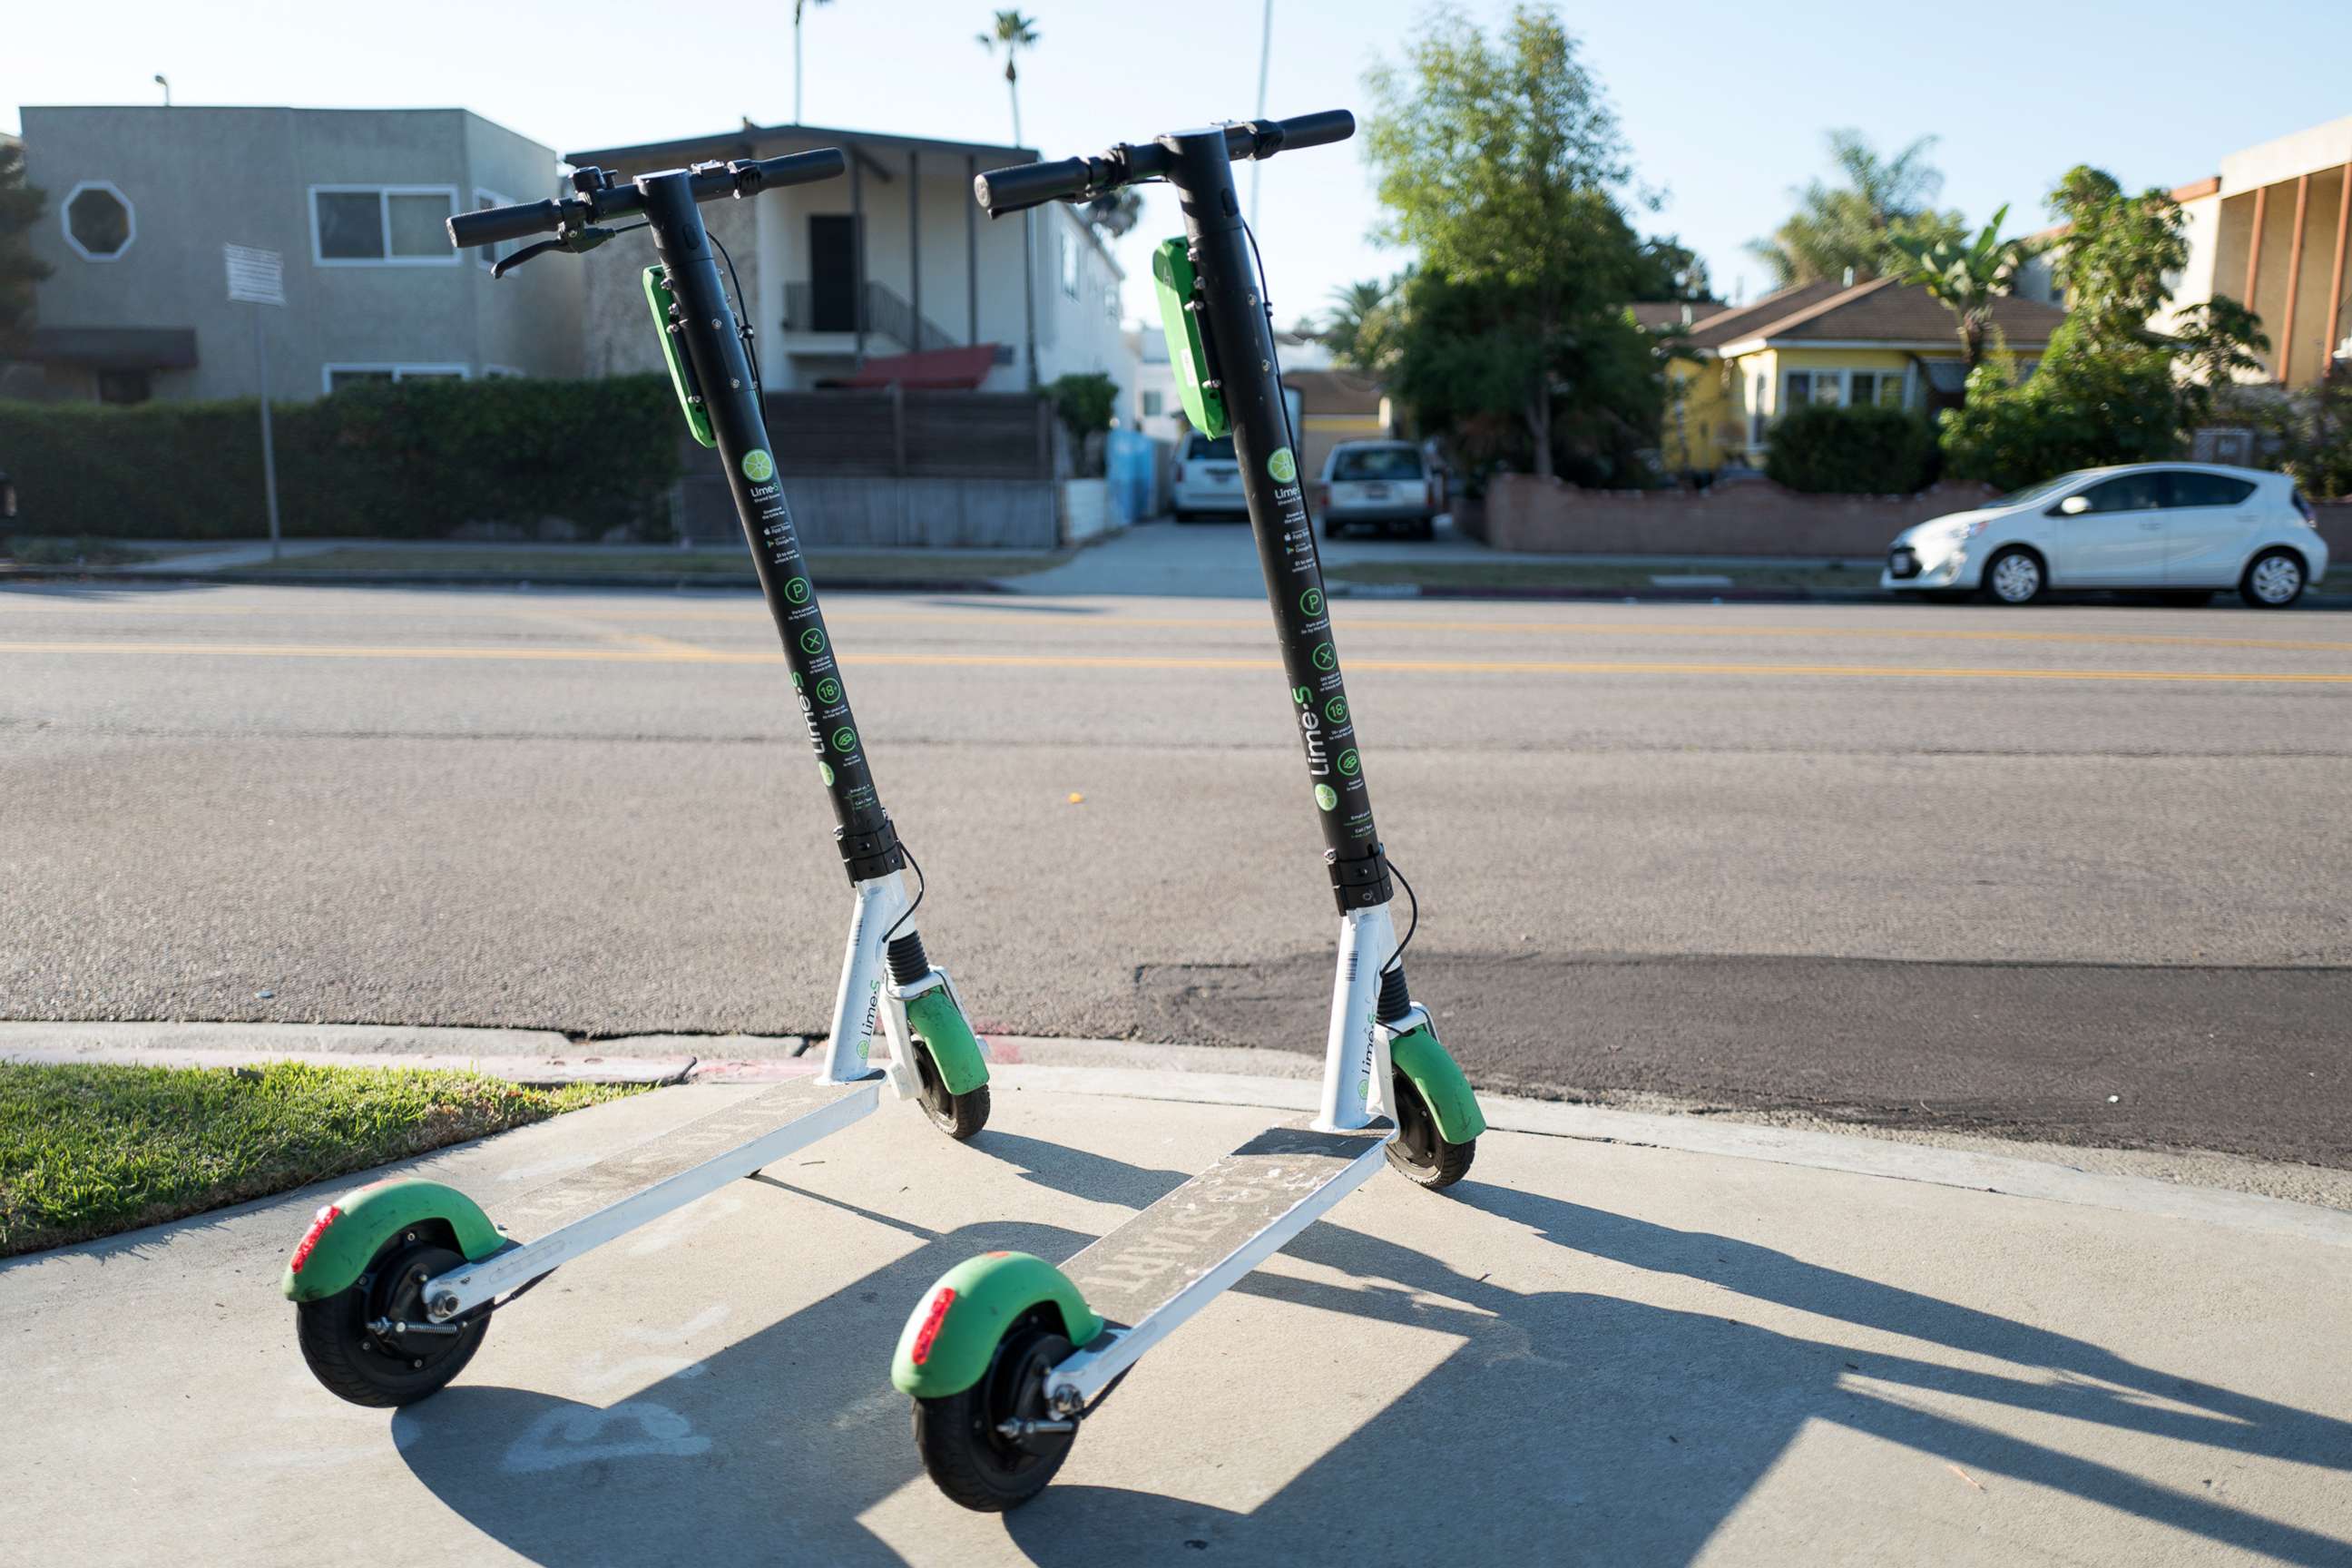 PHOTO: Two scooters from dockless electric scooter sharing economy company Lime are parked in a "hub" near a road in Marina Del Rey, Los Angeles, Oct. 21, 2018.